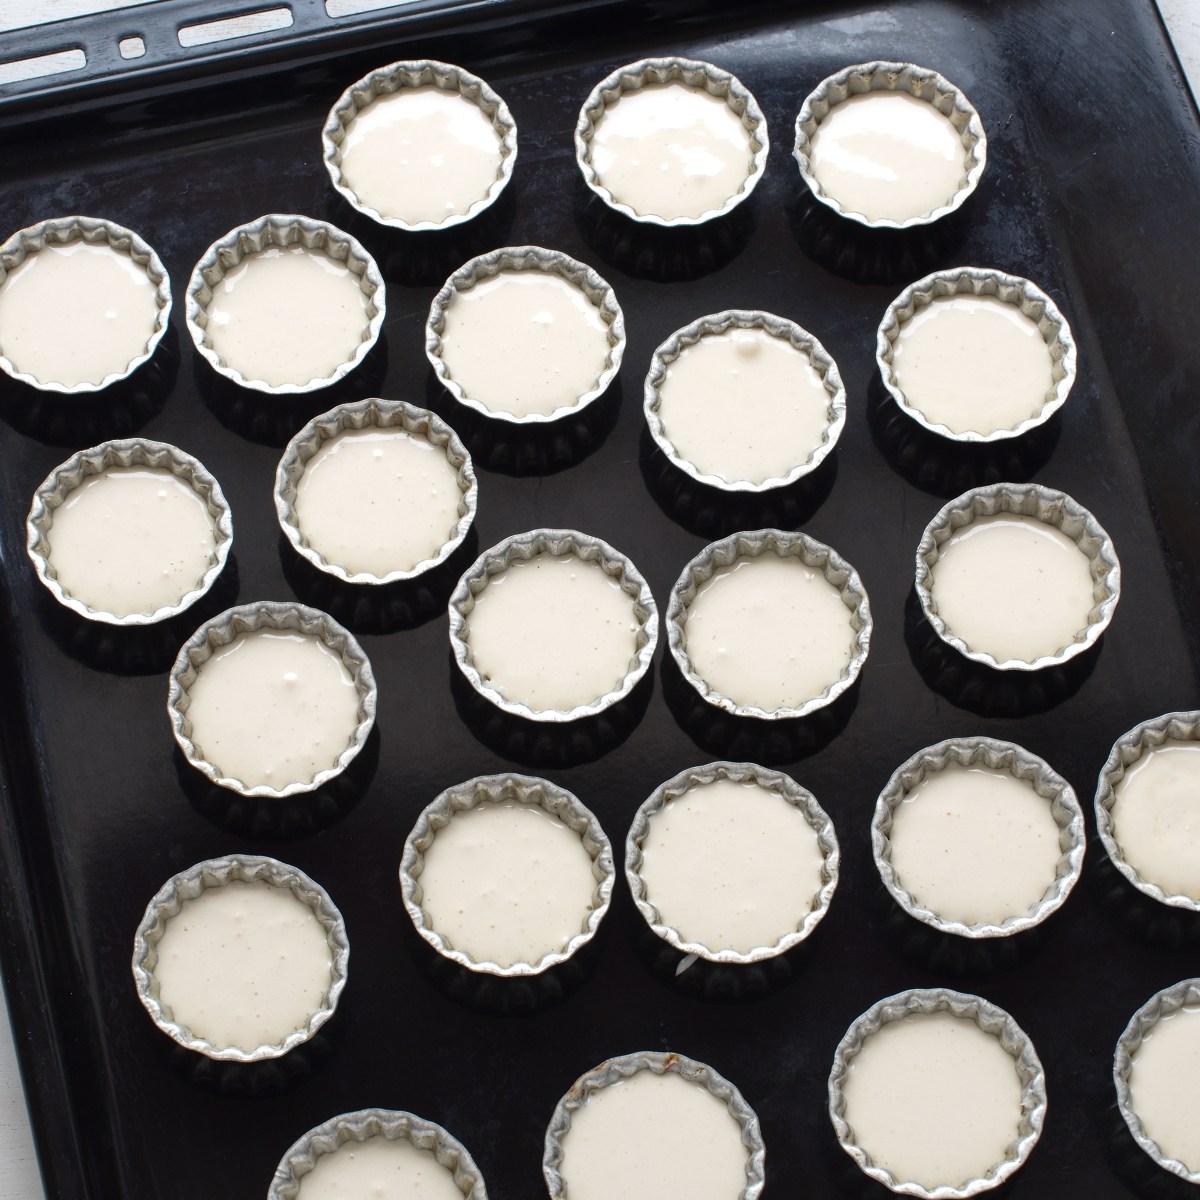 Cookie molds filled with cookie batter, set on a baking tray.